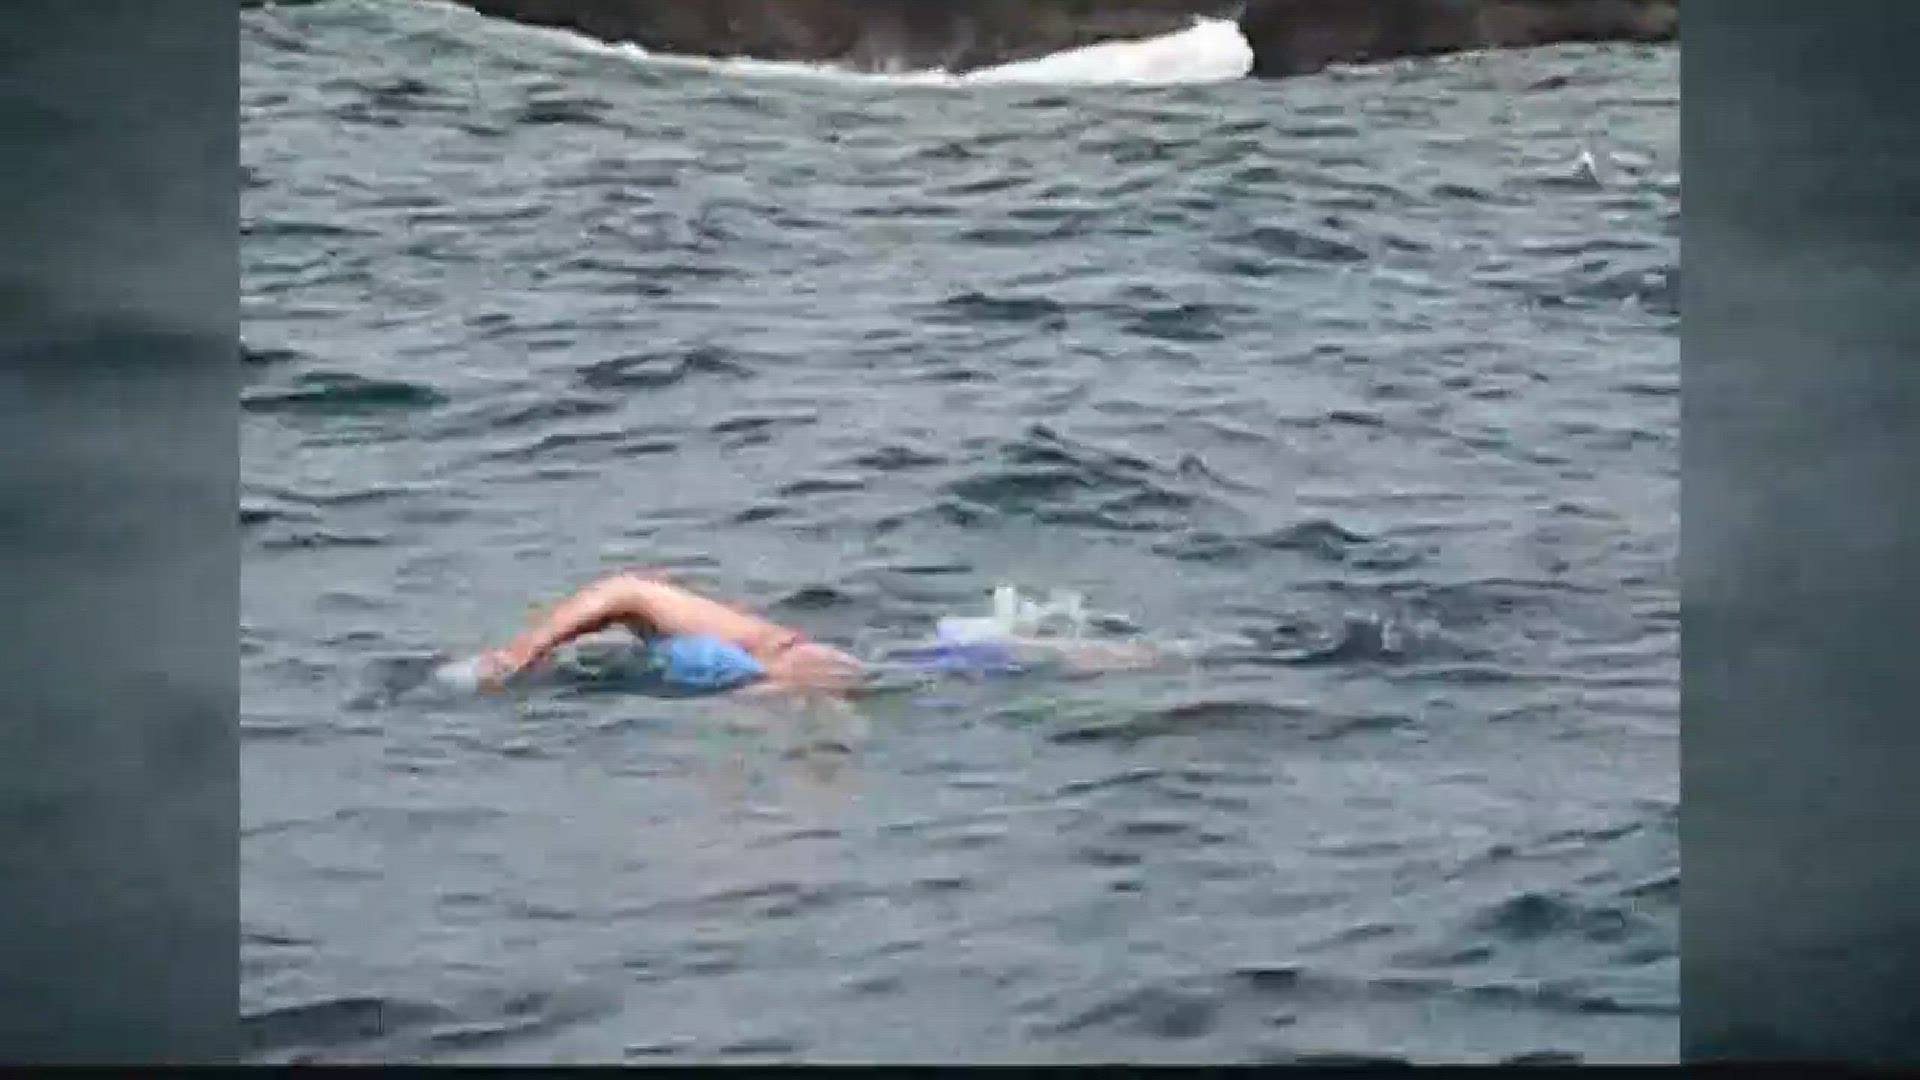 Woman from Maine defies odds, swims the English Channel